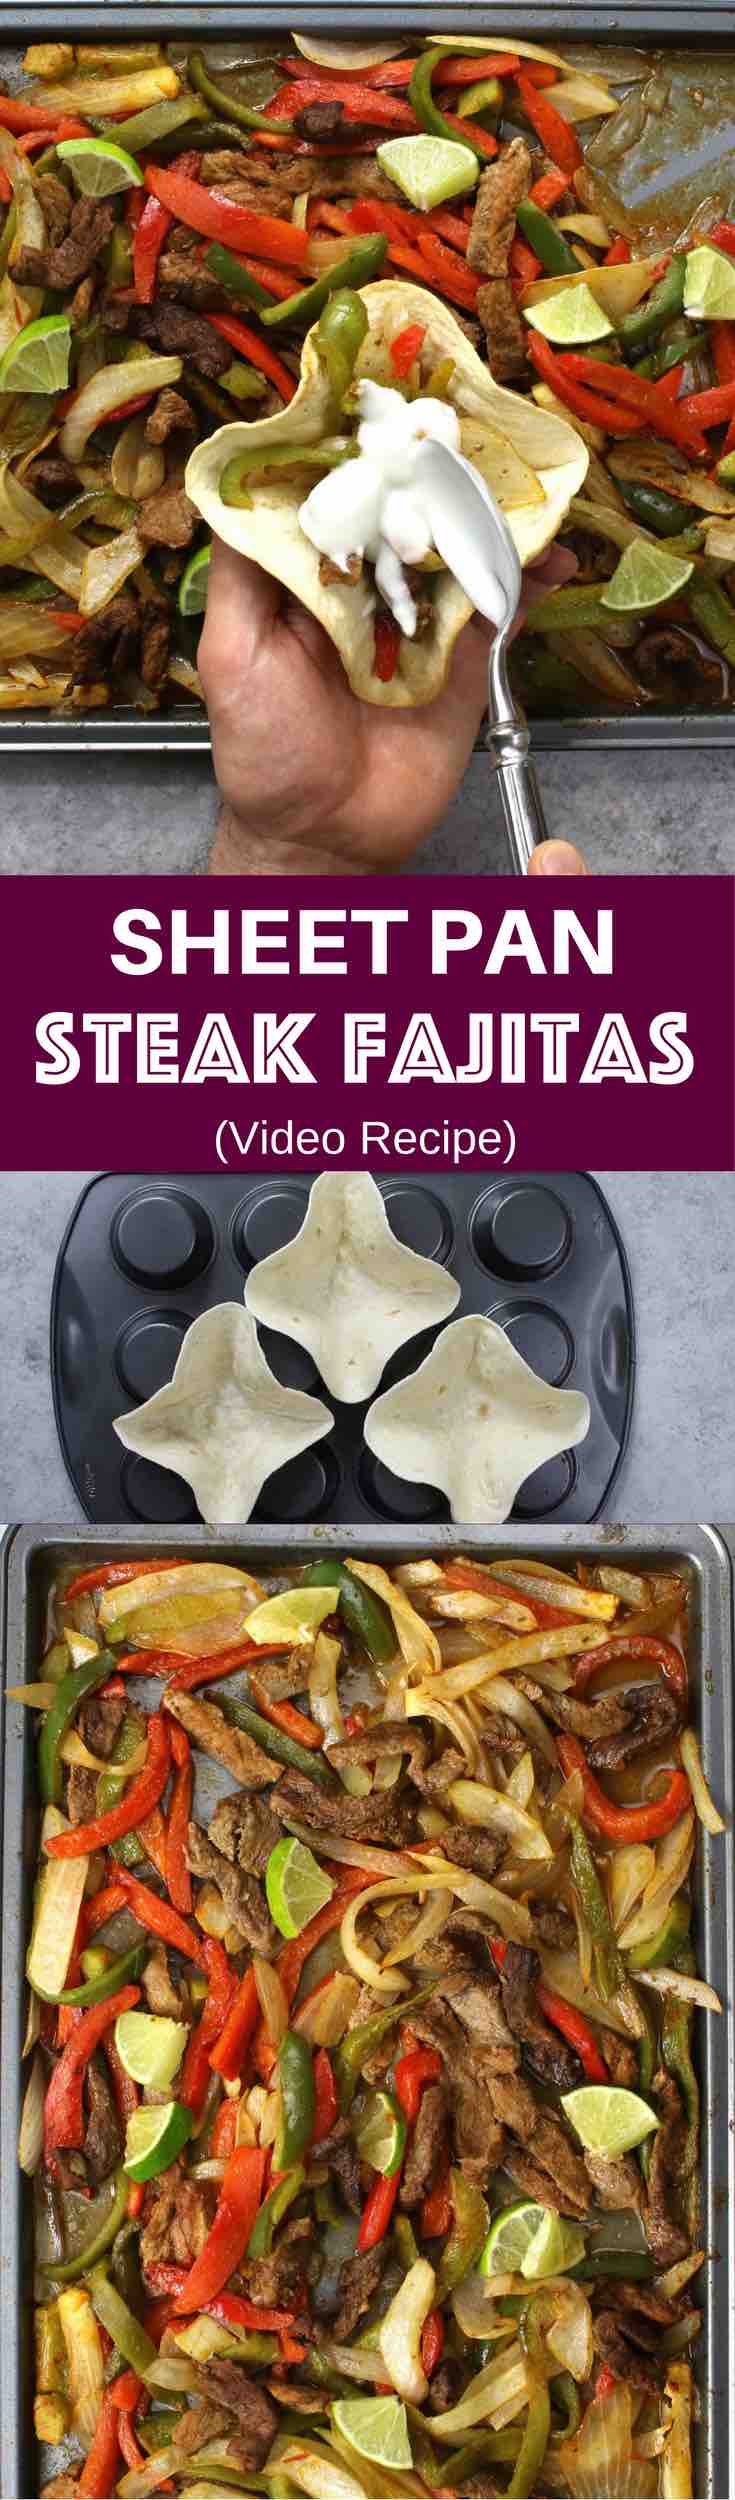 Sheet Pan Steak Fajitas With Taco Bowls – one of the easiest healthy dinner recipes. All you need is only a few simple ingredients: Mixed Bell peppers, sliced onions and steak, mixed with some simple spices (ground cumin, chili powder, garlic powder, salt and olive oil). Perfectly baked in the oven, and served on baked tortilla bowls. Simply Yummy! Make-ahead recipe. Quick and easy dinner recipe. | tipbuzz.com